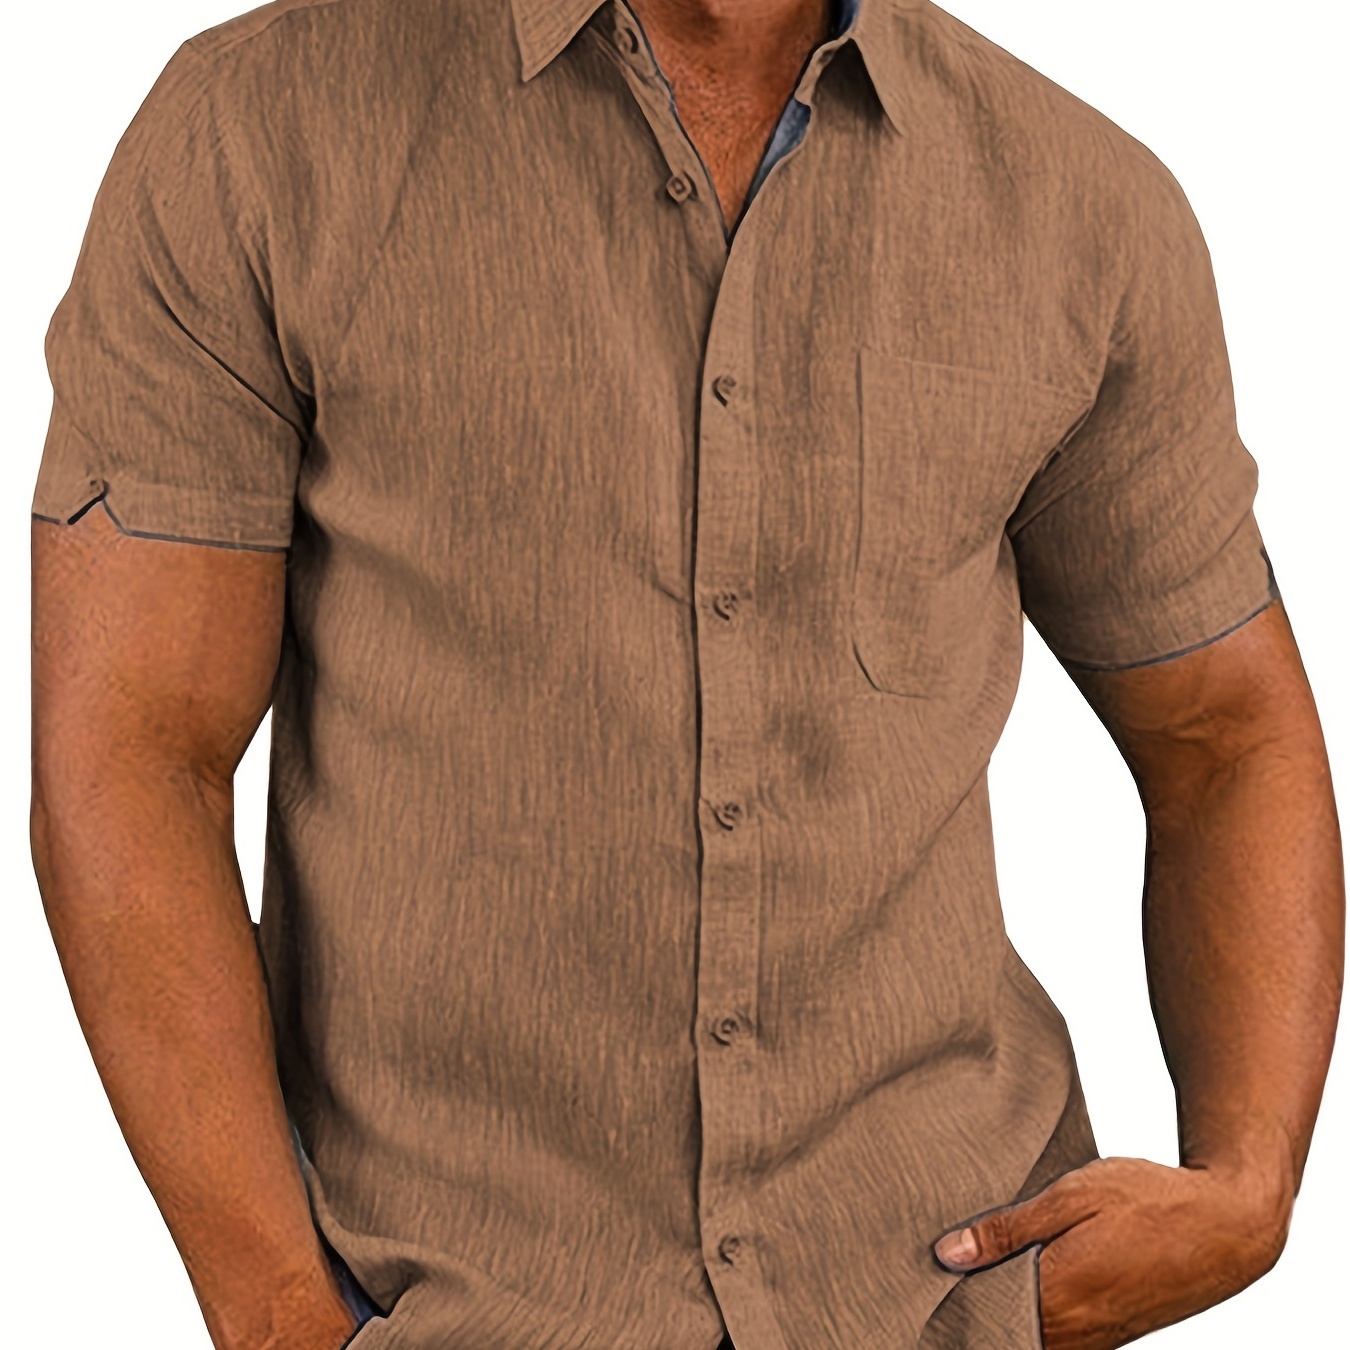 

Classic Solid Color Men's Casual Short Sleeve Shirt, Men's Thin Shirt For Spring Summer, Vacation Resort